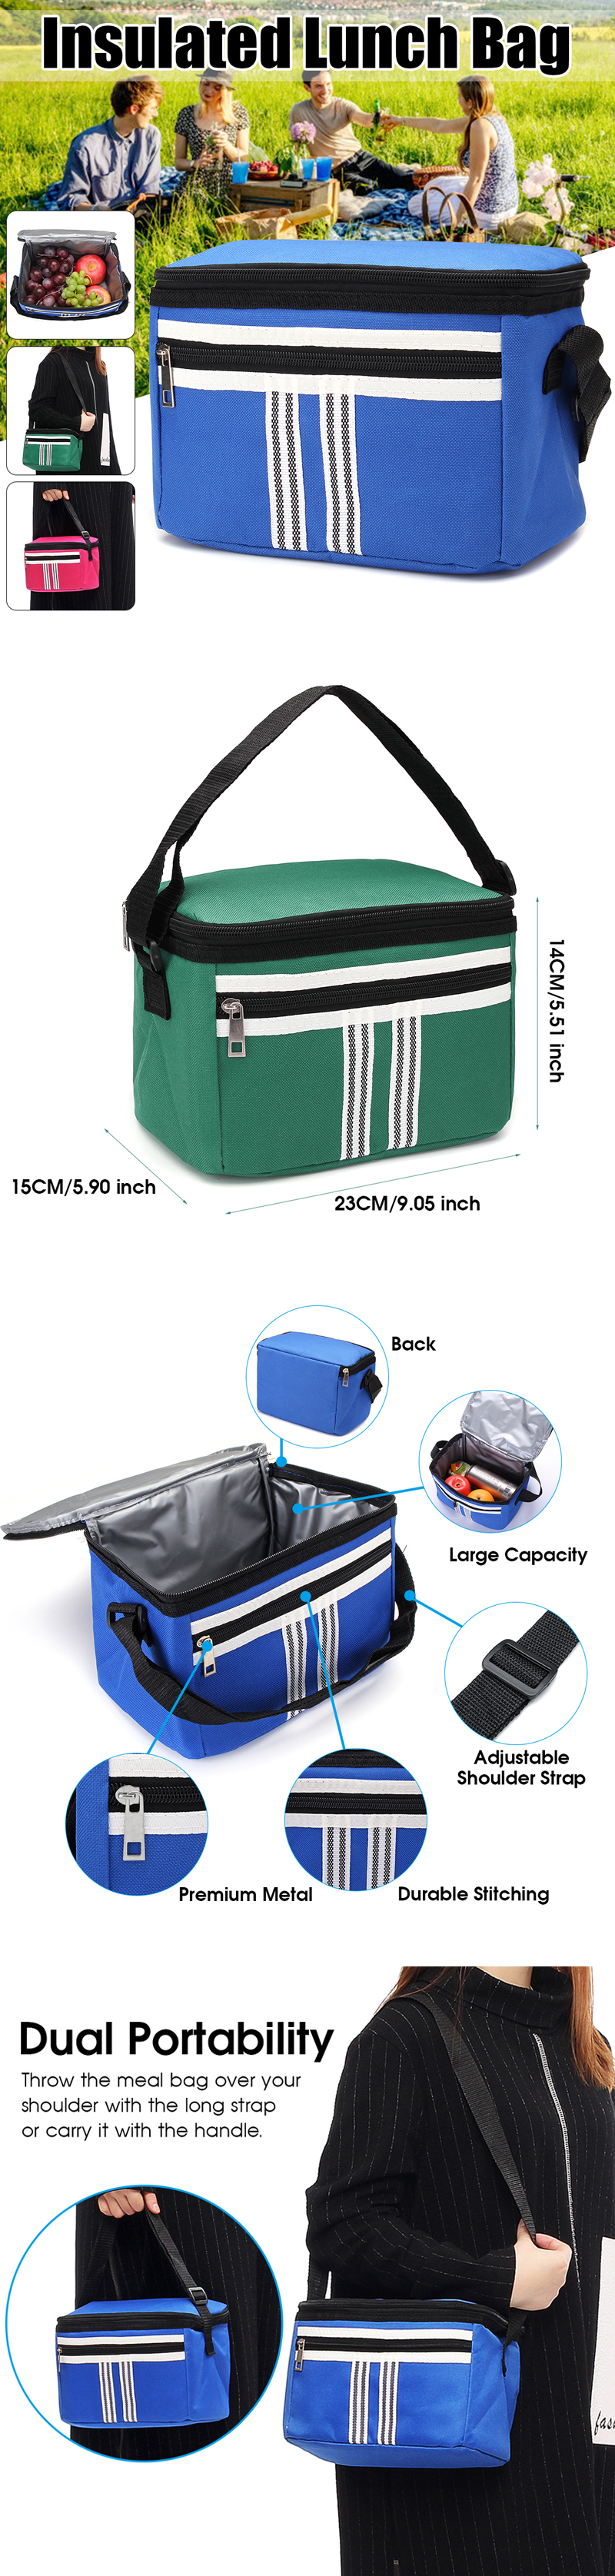 5L-Picnic-Bag-Thermal-Cooler-Insulated-Lunch-Bag-Food-Container-Pouch-Outdoor-Camping-1462699-1